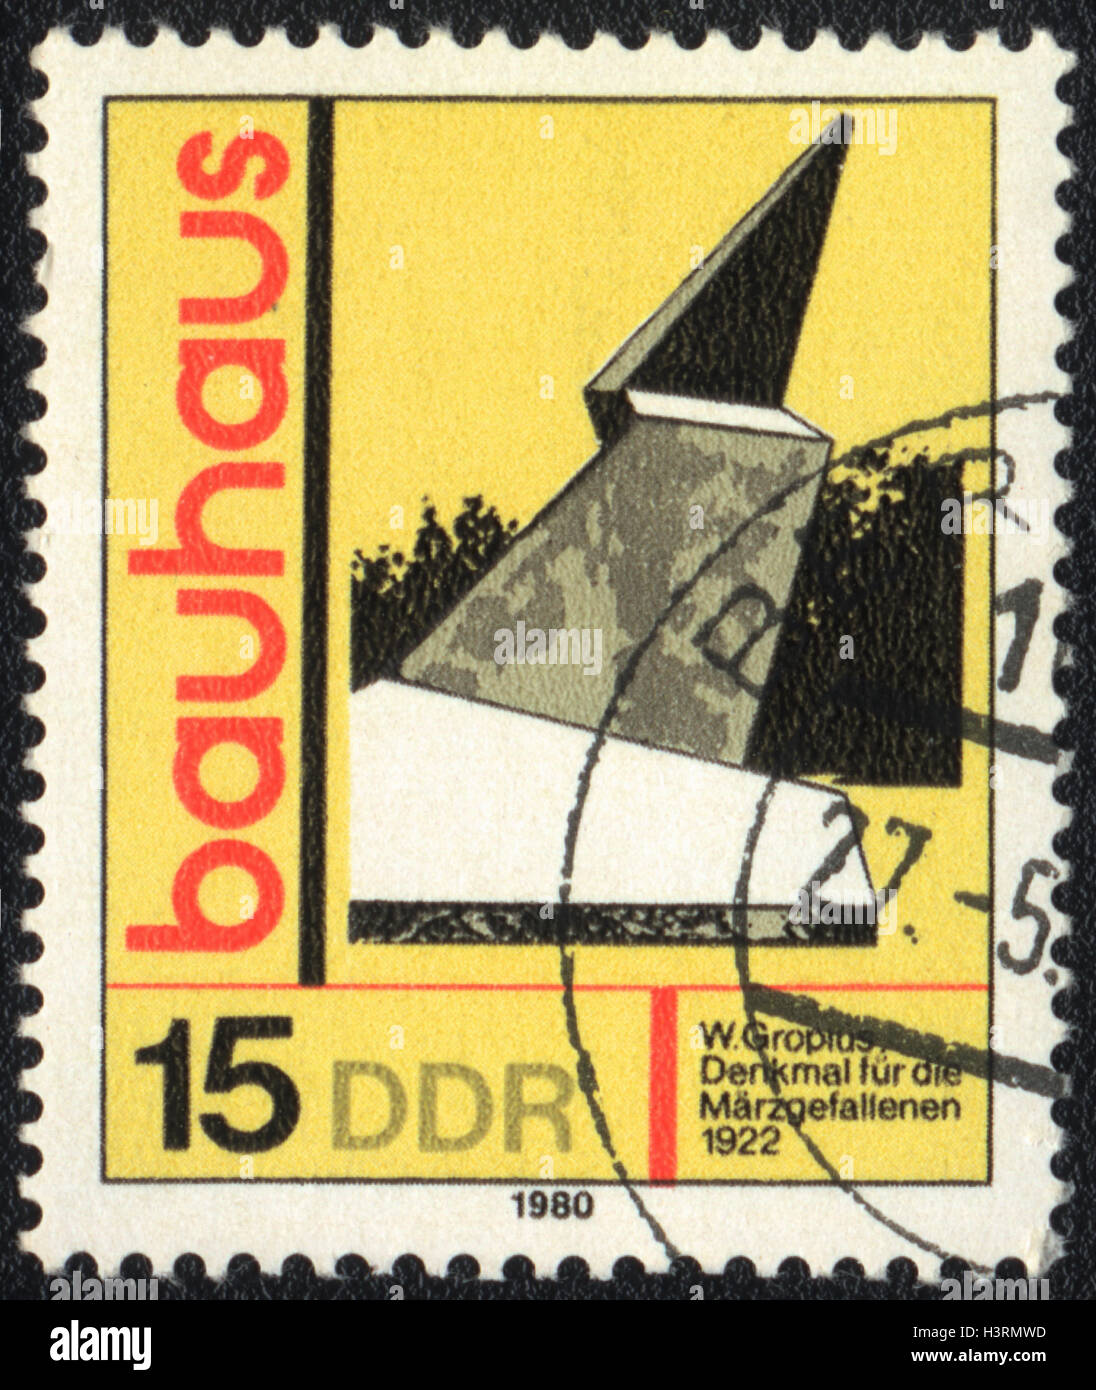 A postage stamp printed in DDR Germany,  shows The Marzgefallenen Memorial, Bauhaus school, 1980 Stock Photo